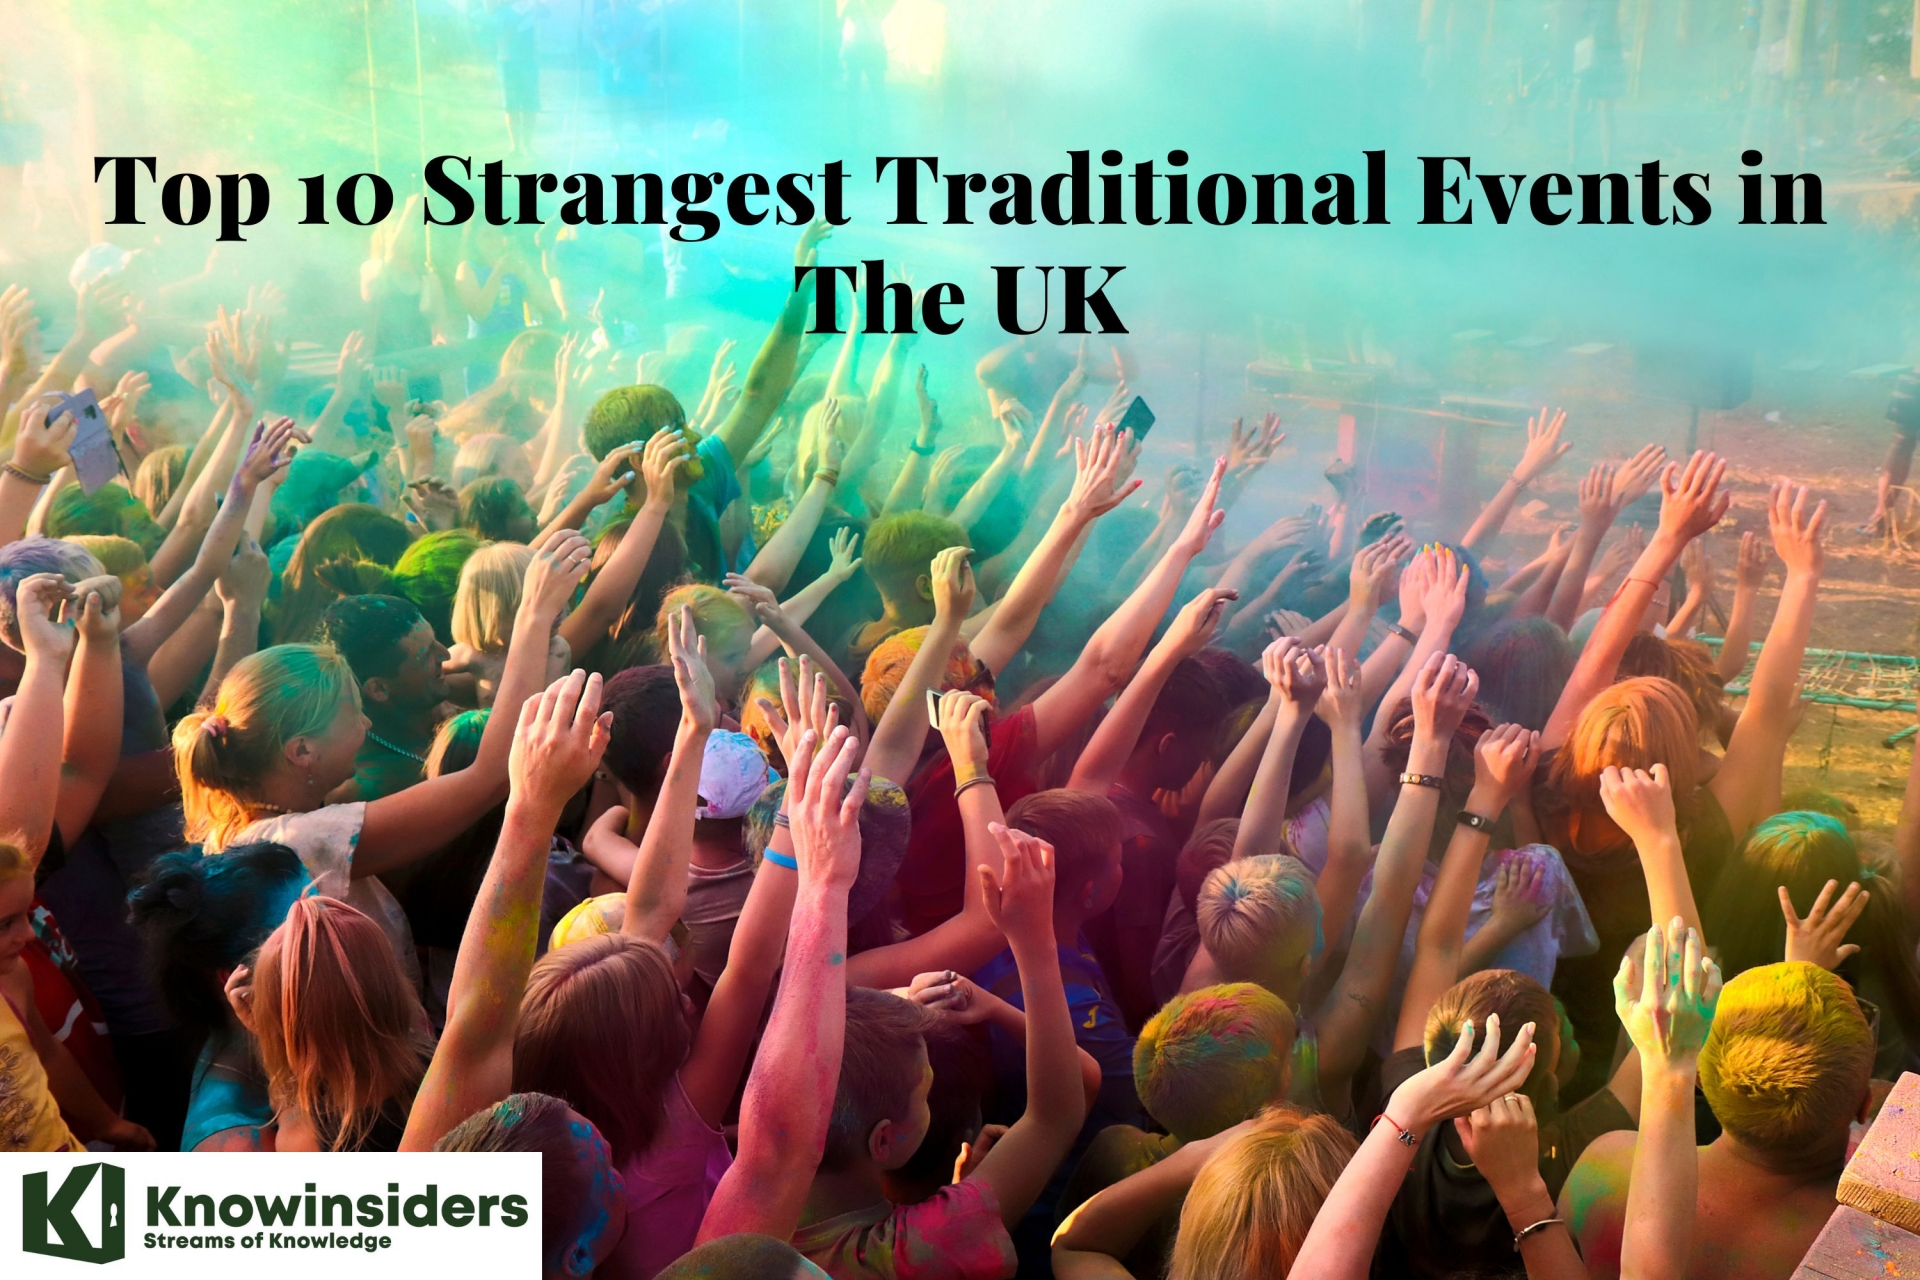 Top 10 Strangest Traditional Events in The UK